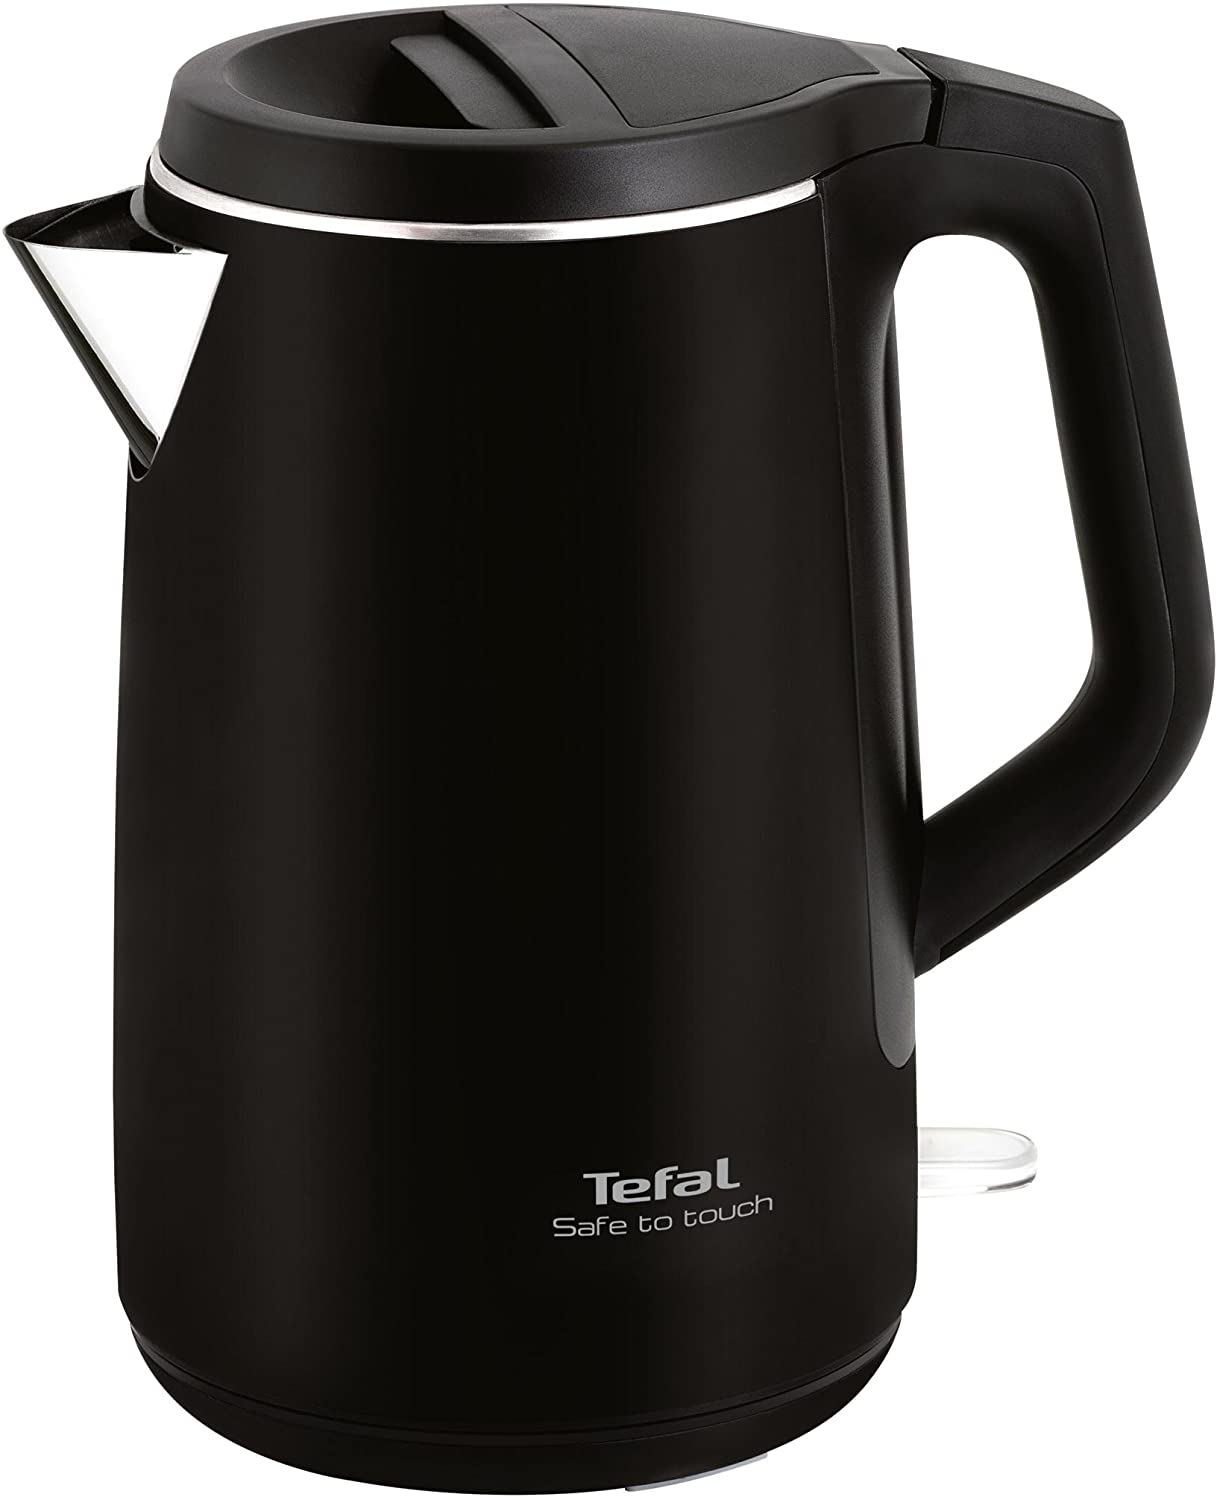 Tefal KO3718 Kettle Safe to Touch 1.5 Litres Black